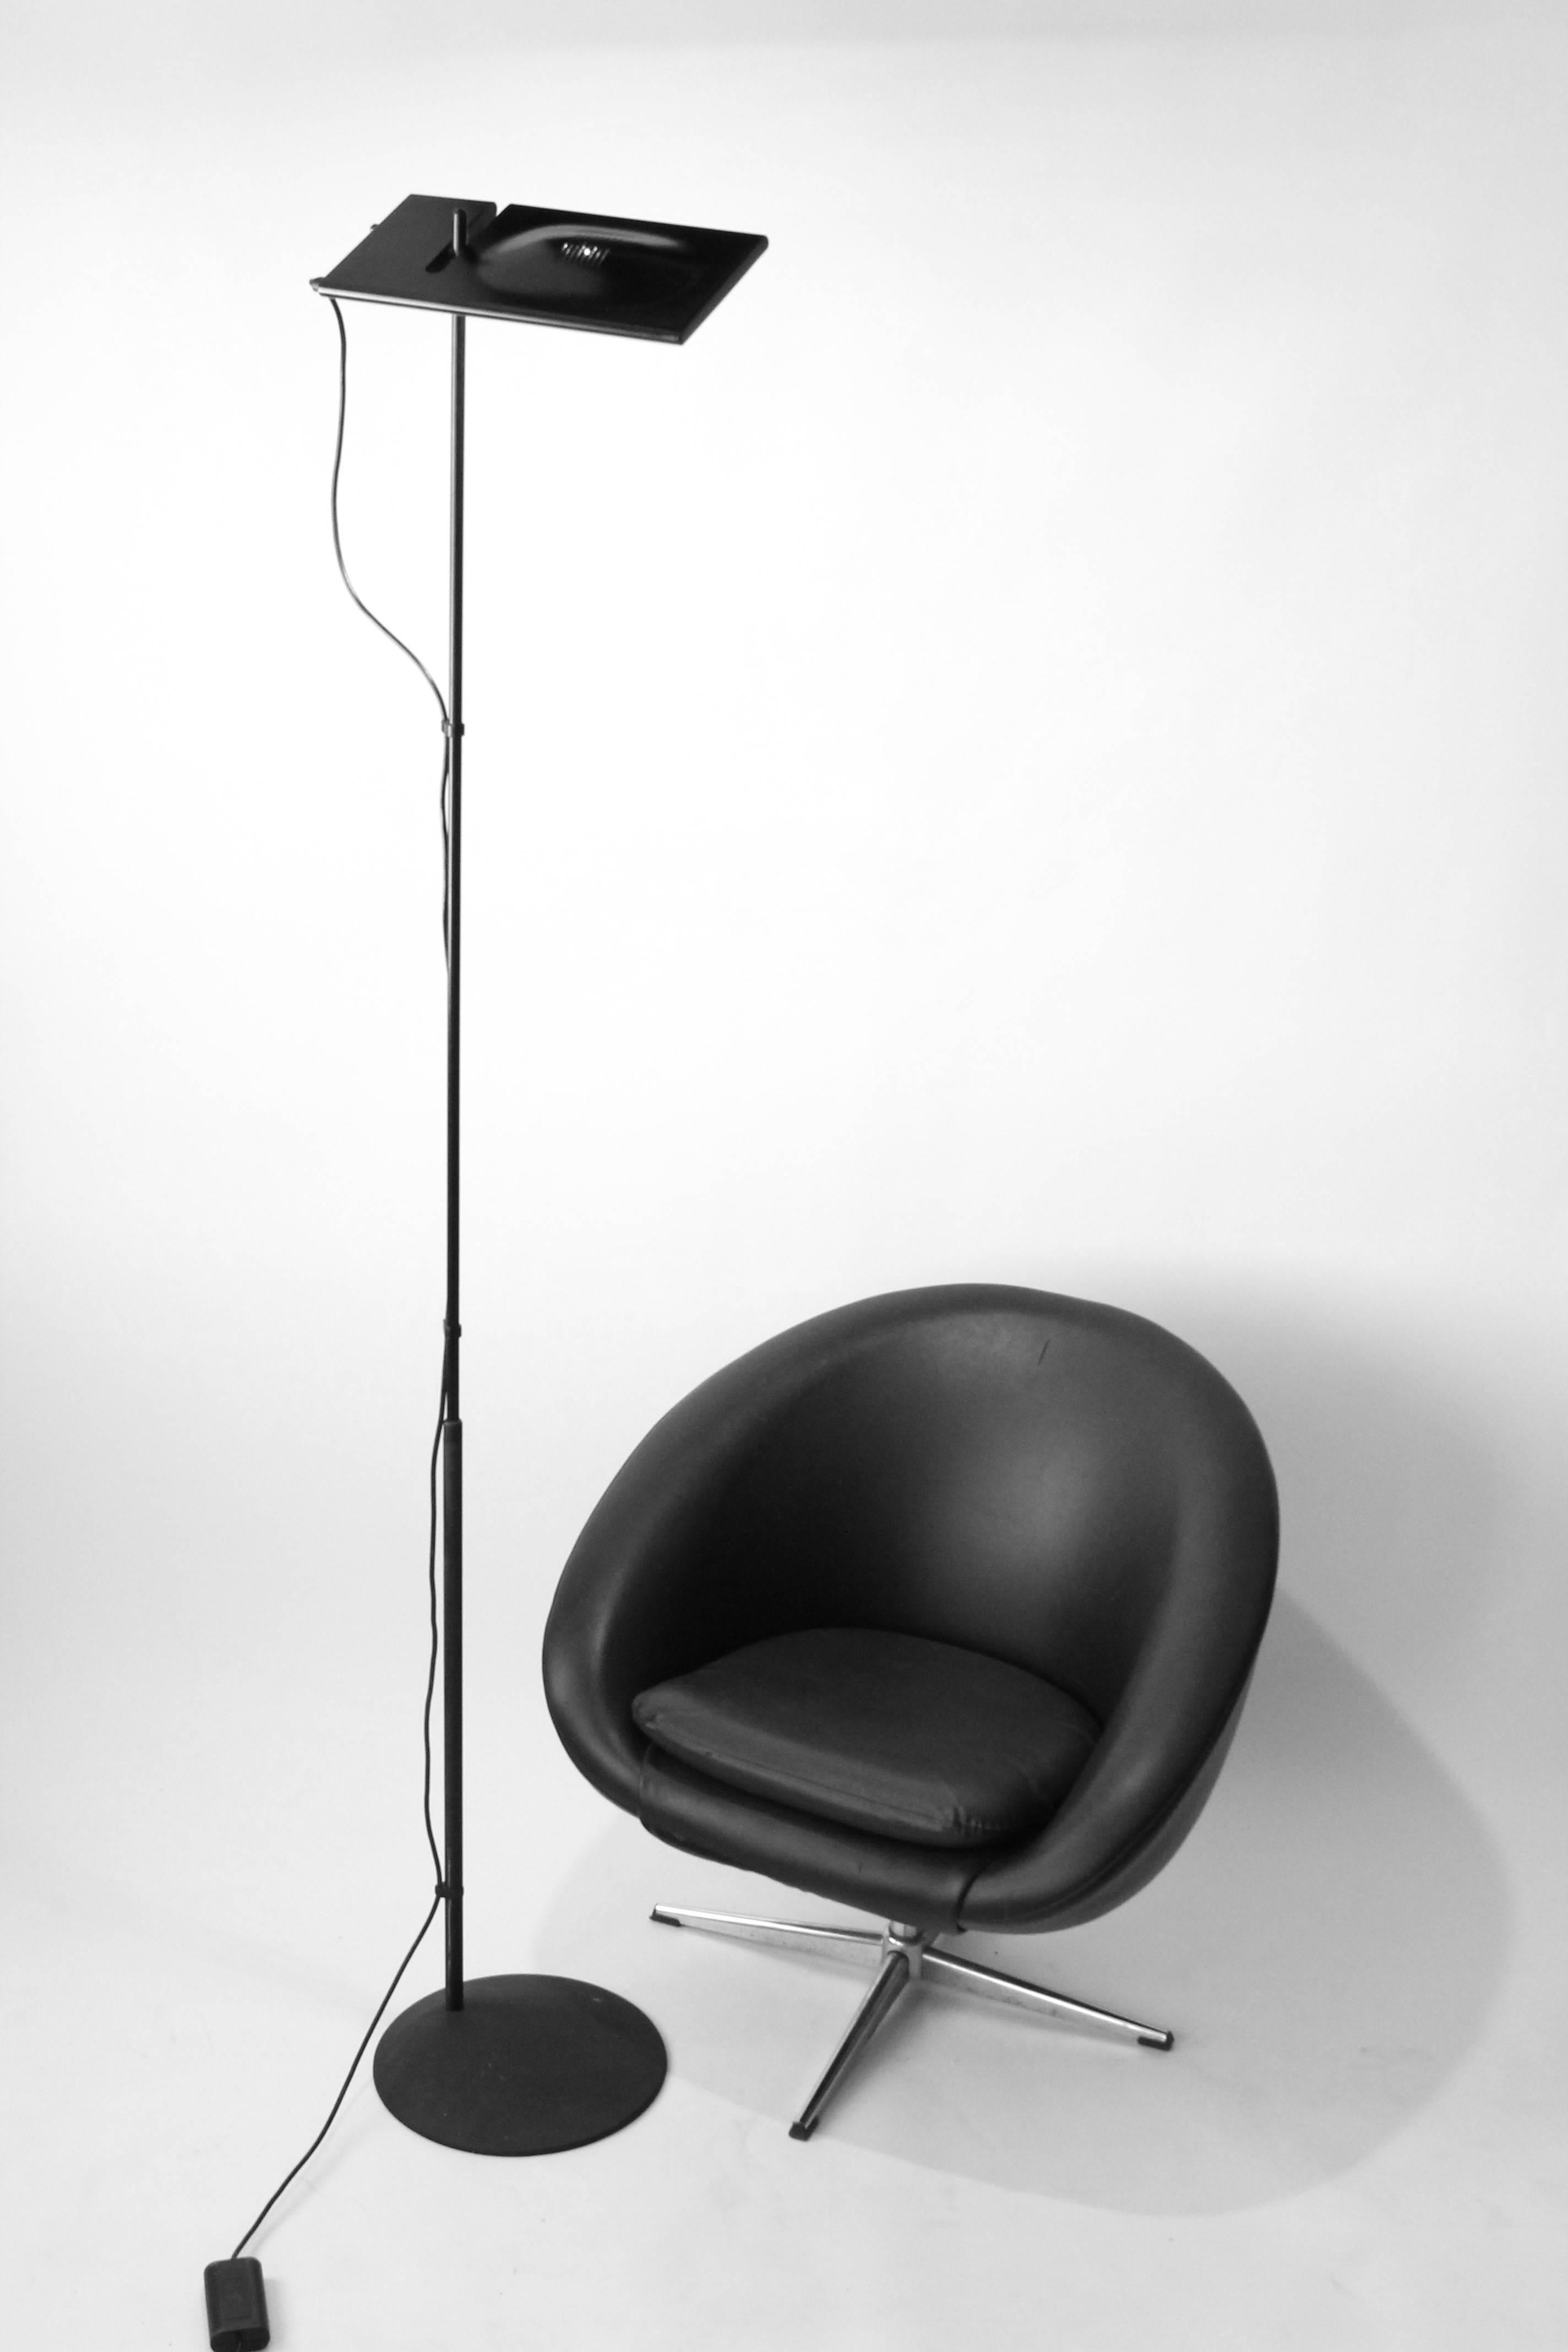 Powerfull Italian minimalist elegance.

This  Duna Terra first edition floor lamp have the rare  original  sliding dimmer on the side of the shade instead of on the cord / floor.

The casted iron conical base with signature under also differ from